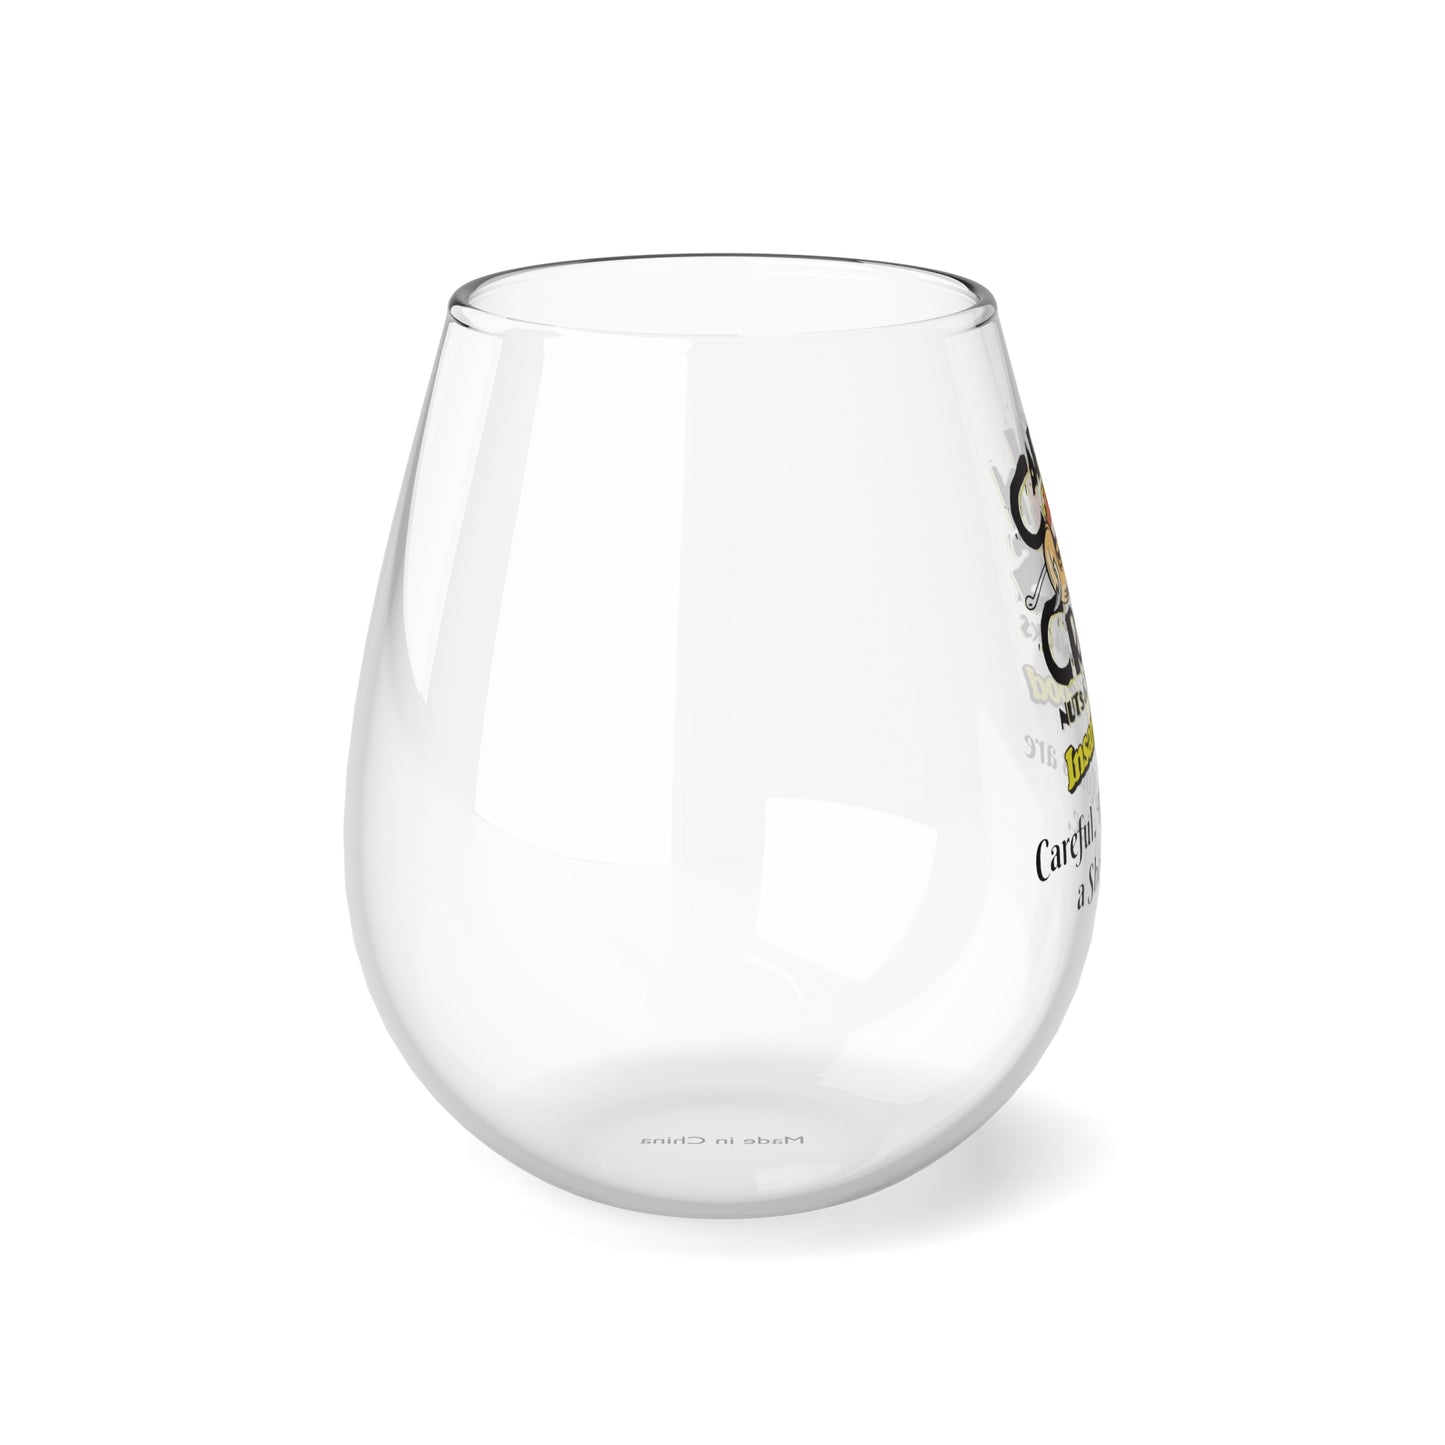 Captain Crazy's Stemless Wine Glass "Careful. The Roads are a Sheet of Ice."